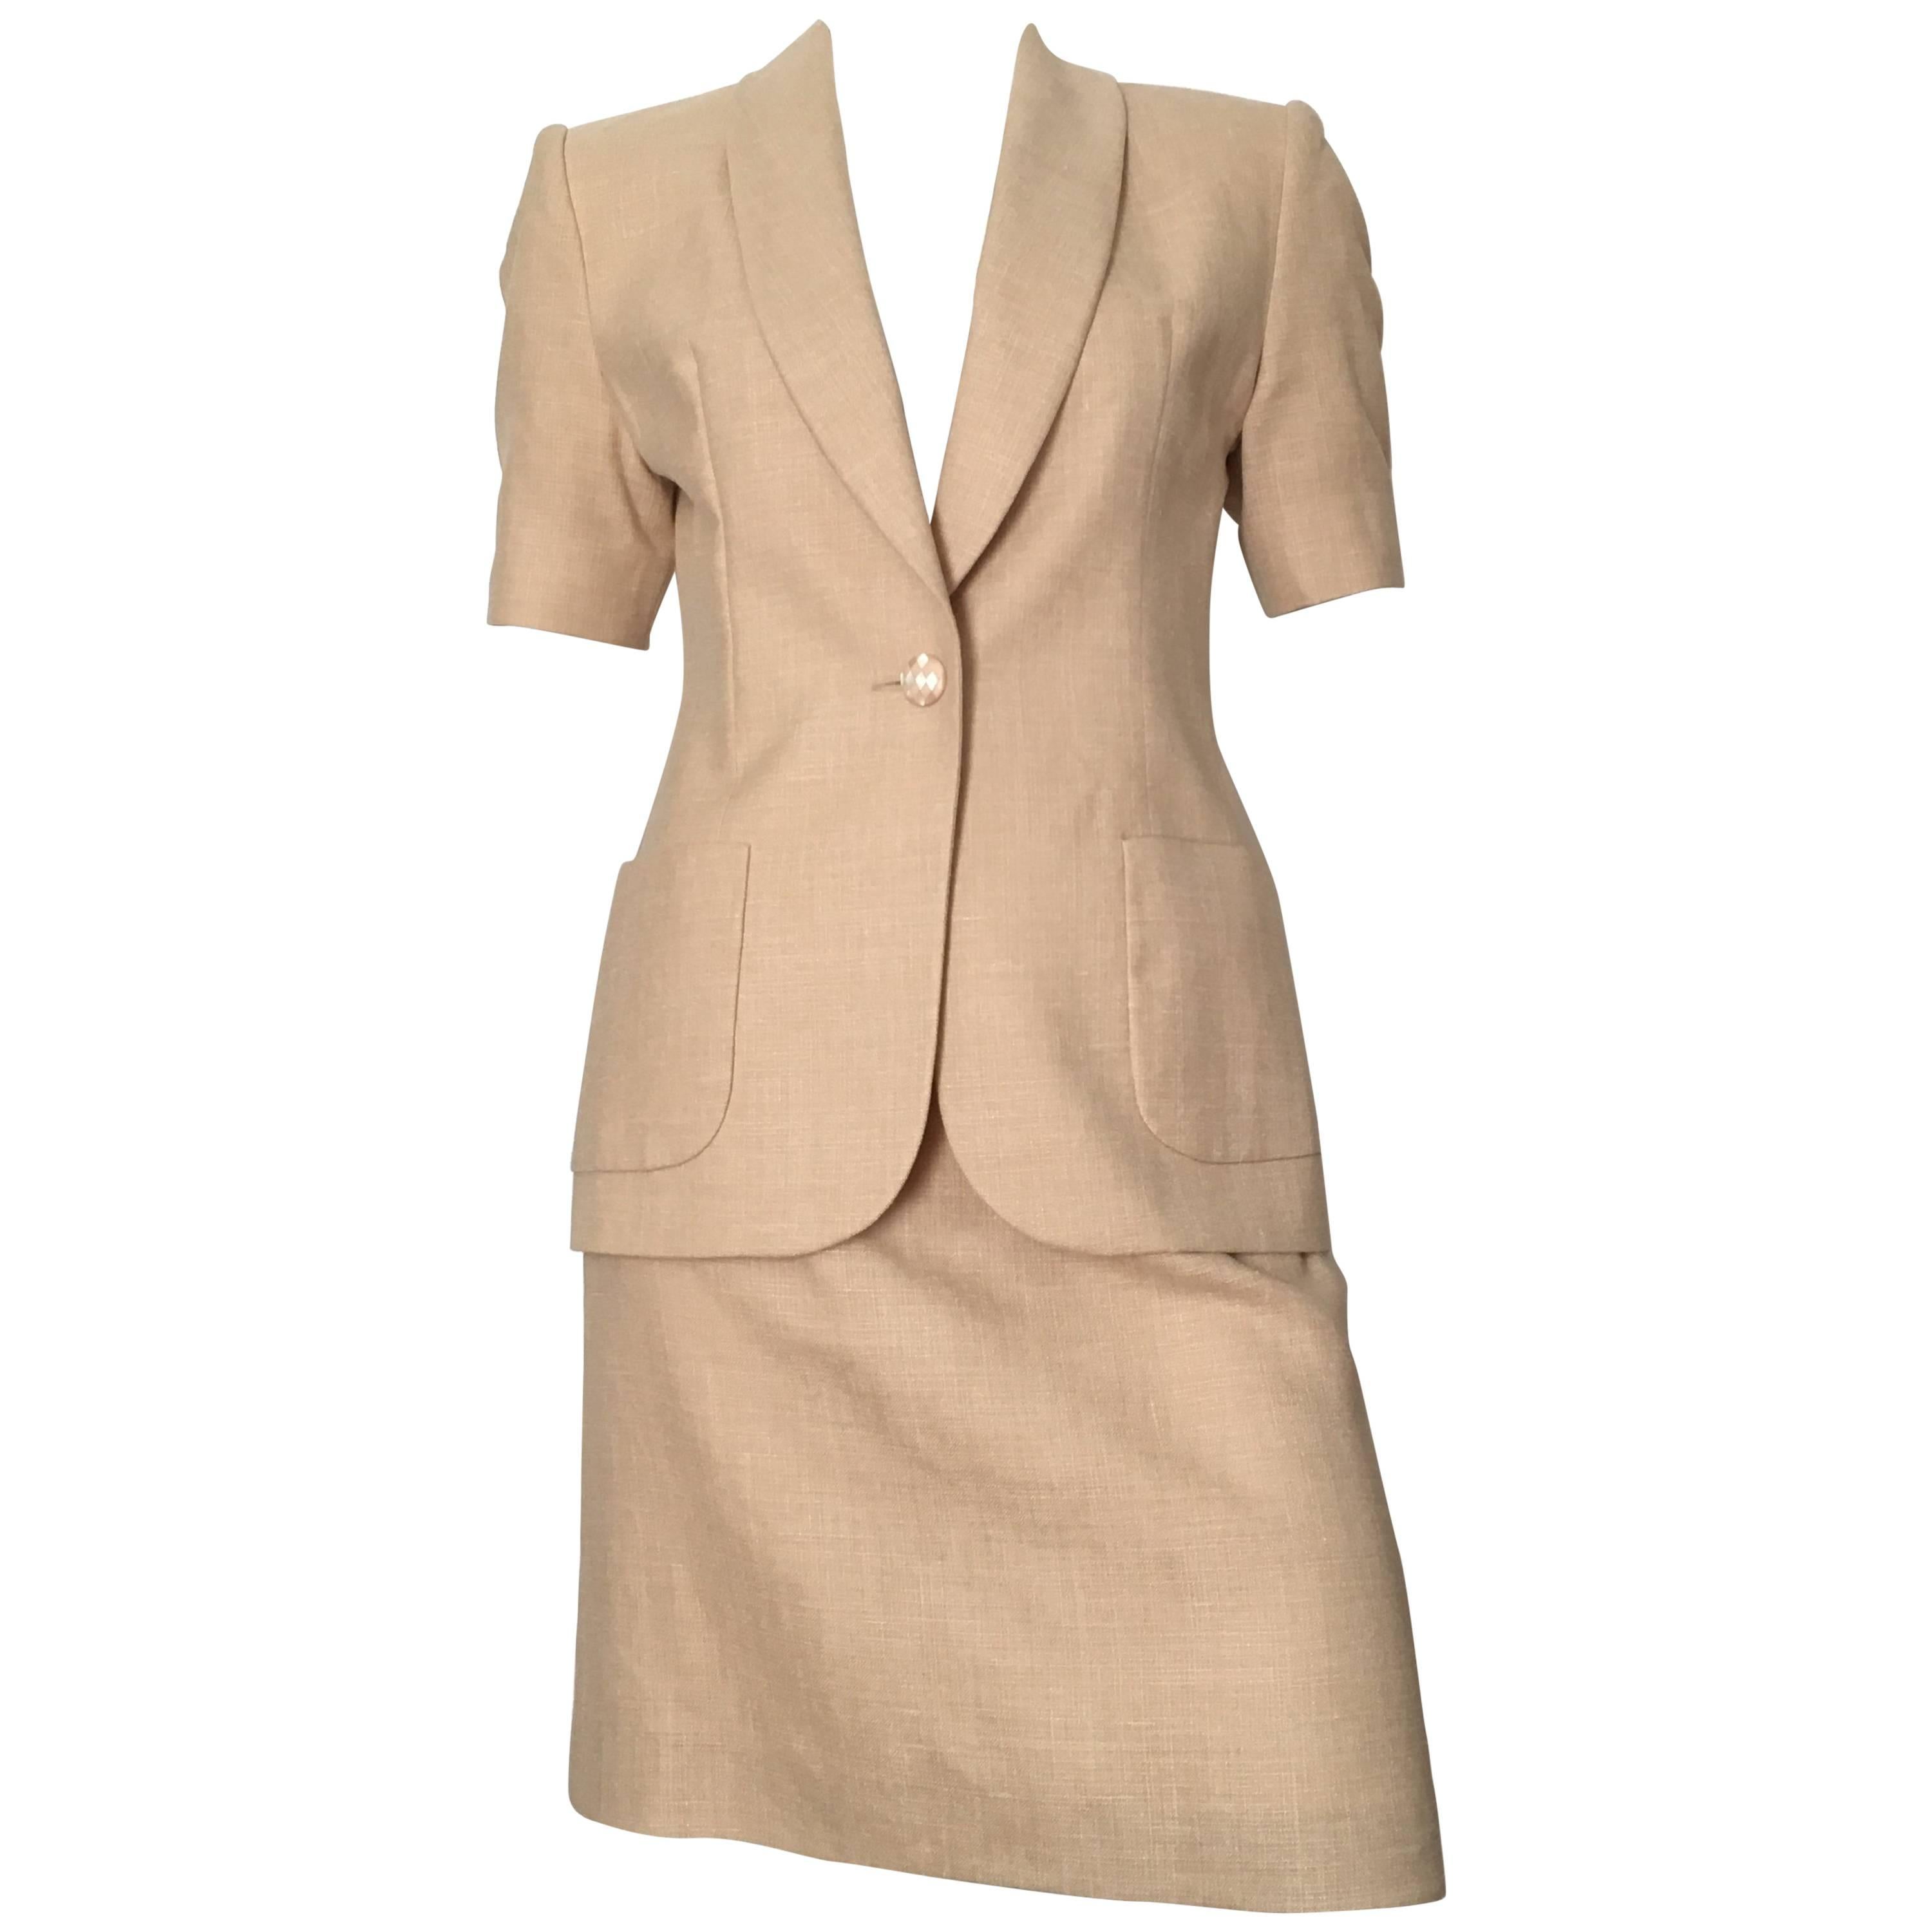 Givenchy Couture 1990s Tan Jacket & Skirt Set Size 6.